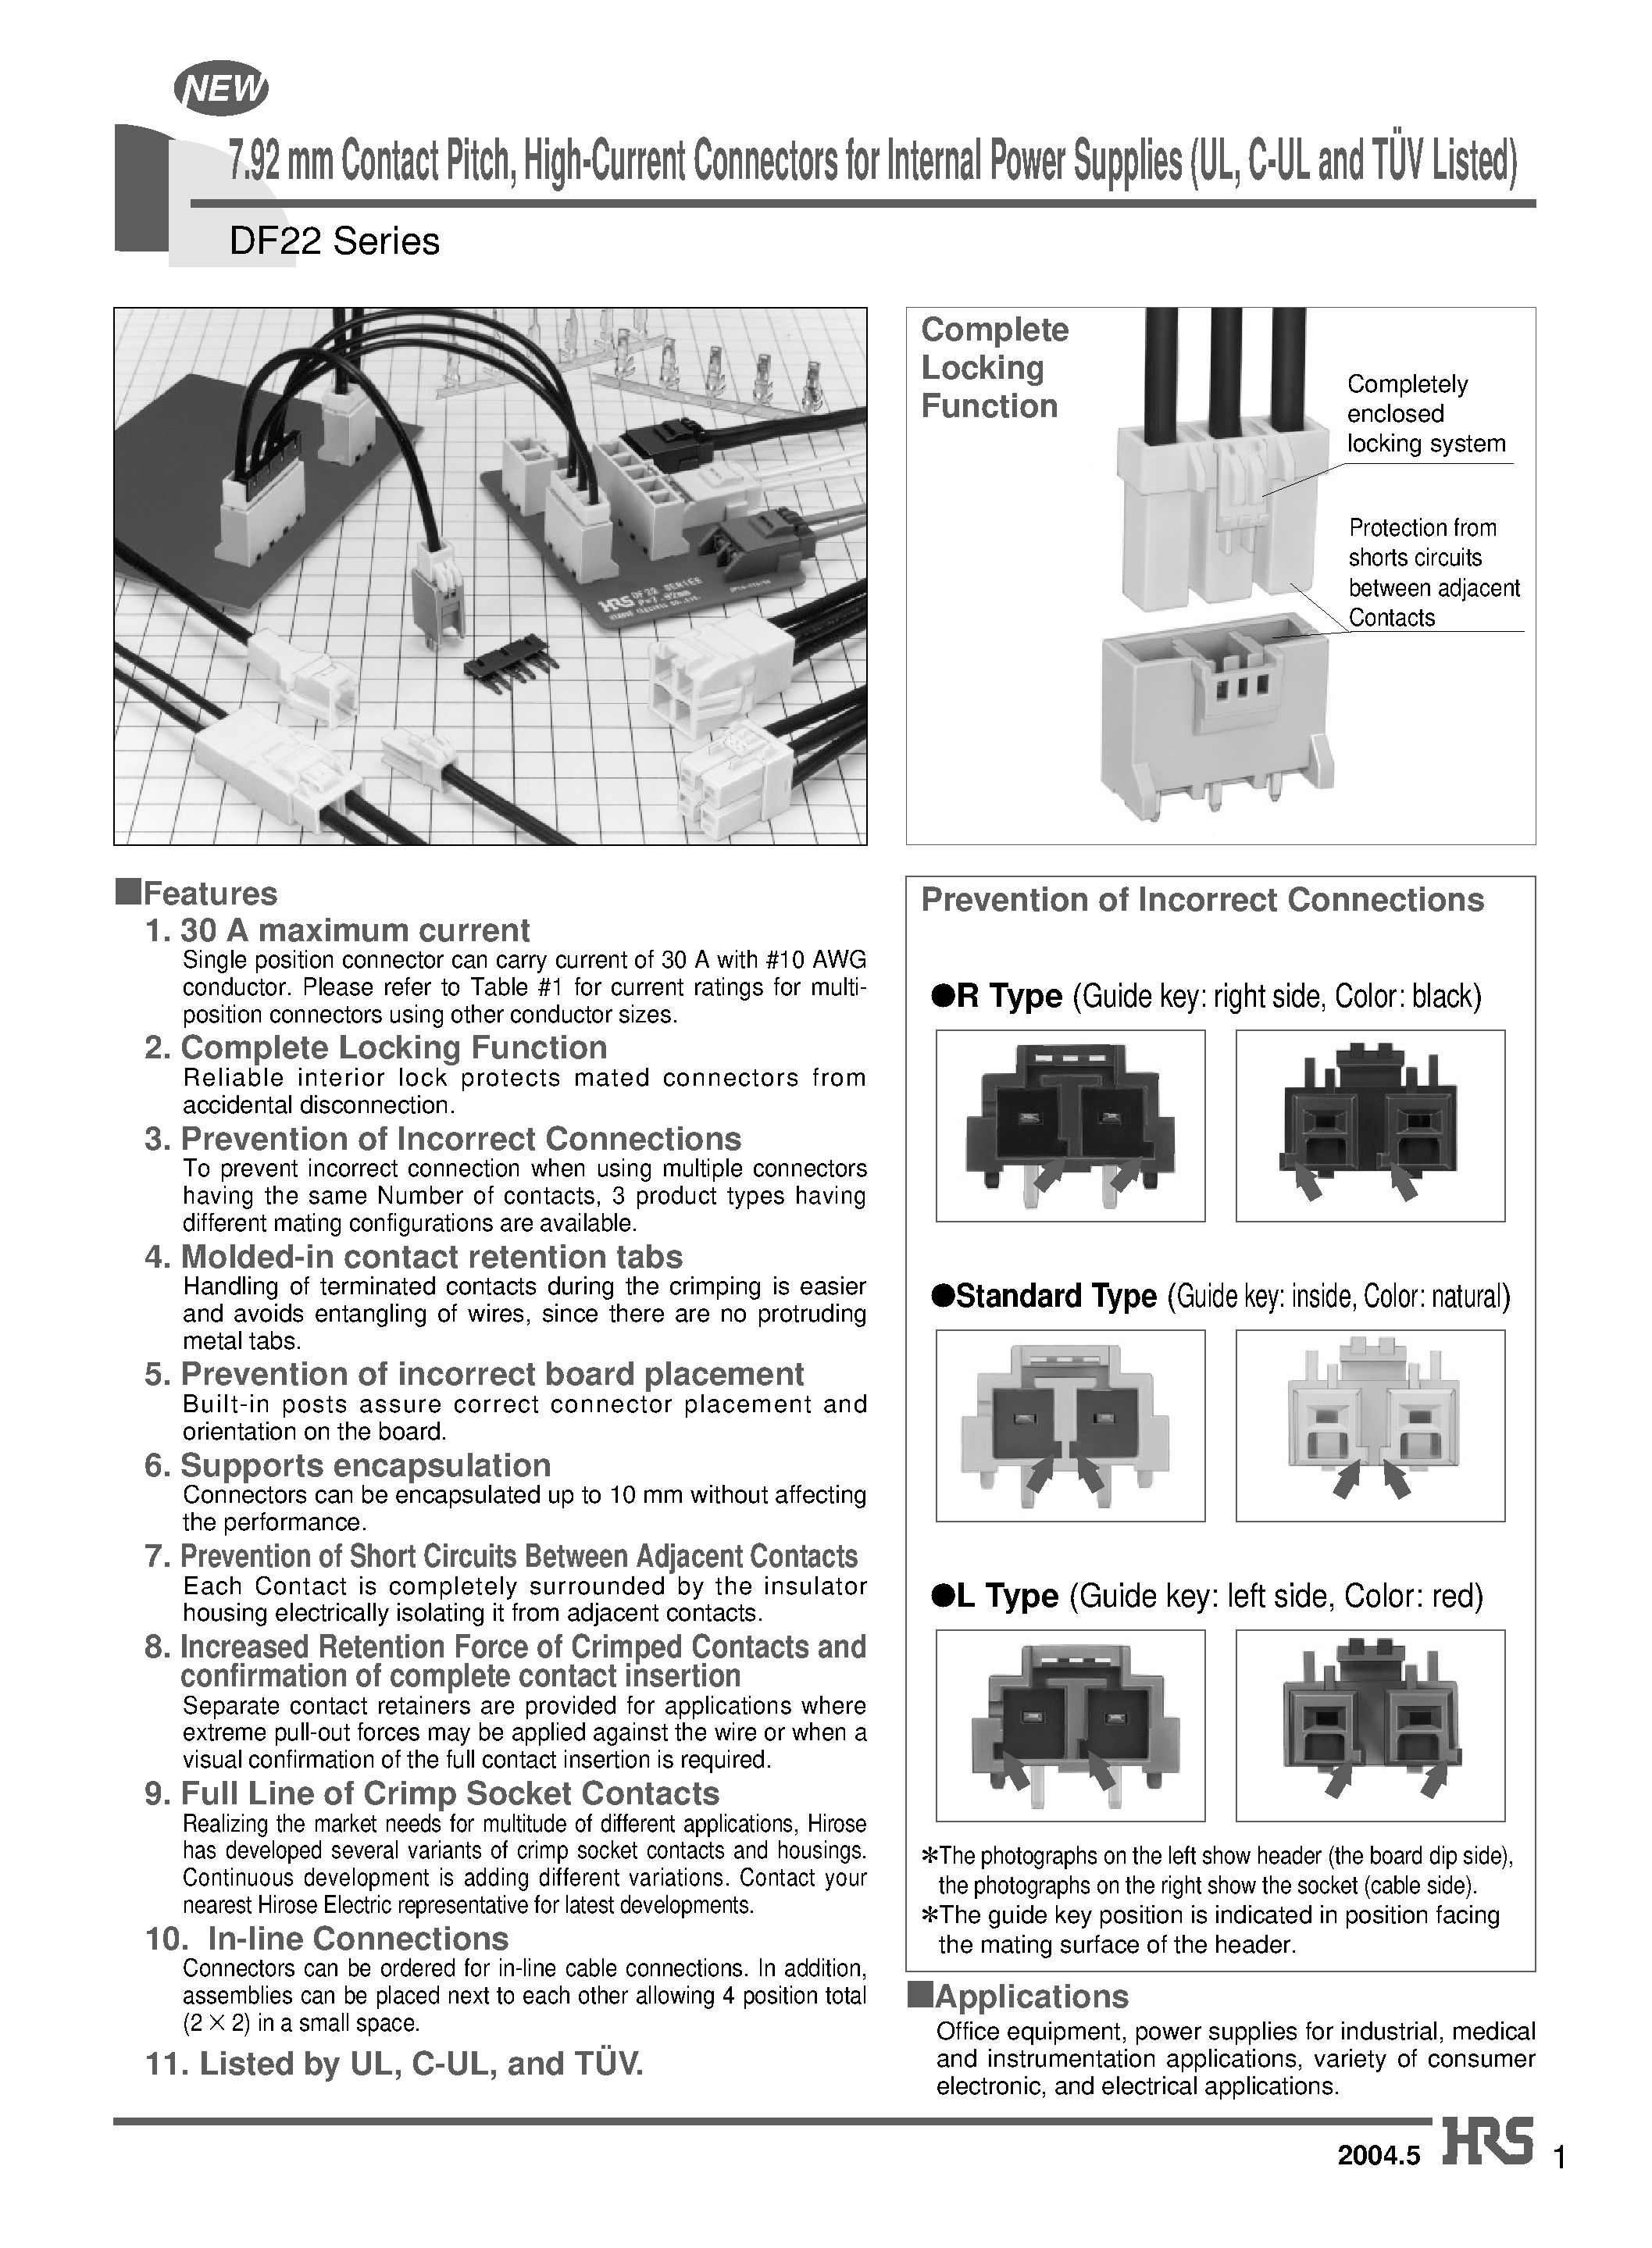 Datasheet DF22-4EP-7.92DSA - 7.92 mm Contact Pitch/ High-Current Connectors for Internal Power Supplies (UL/ C-UL and TUV Listed) page 1